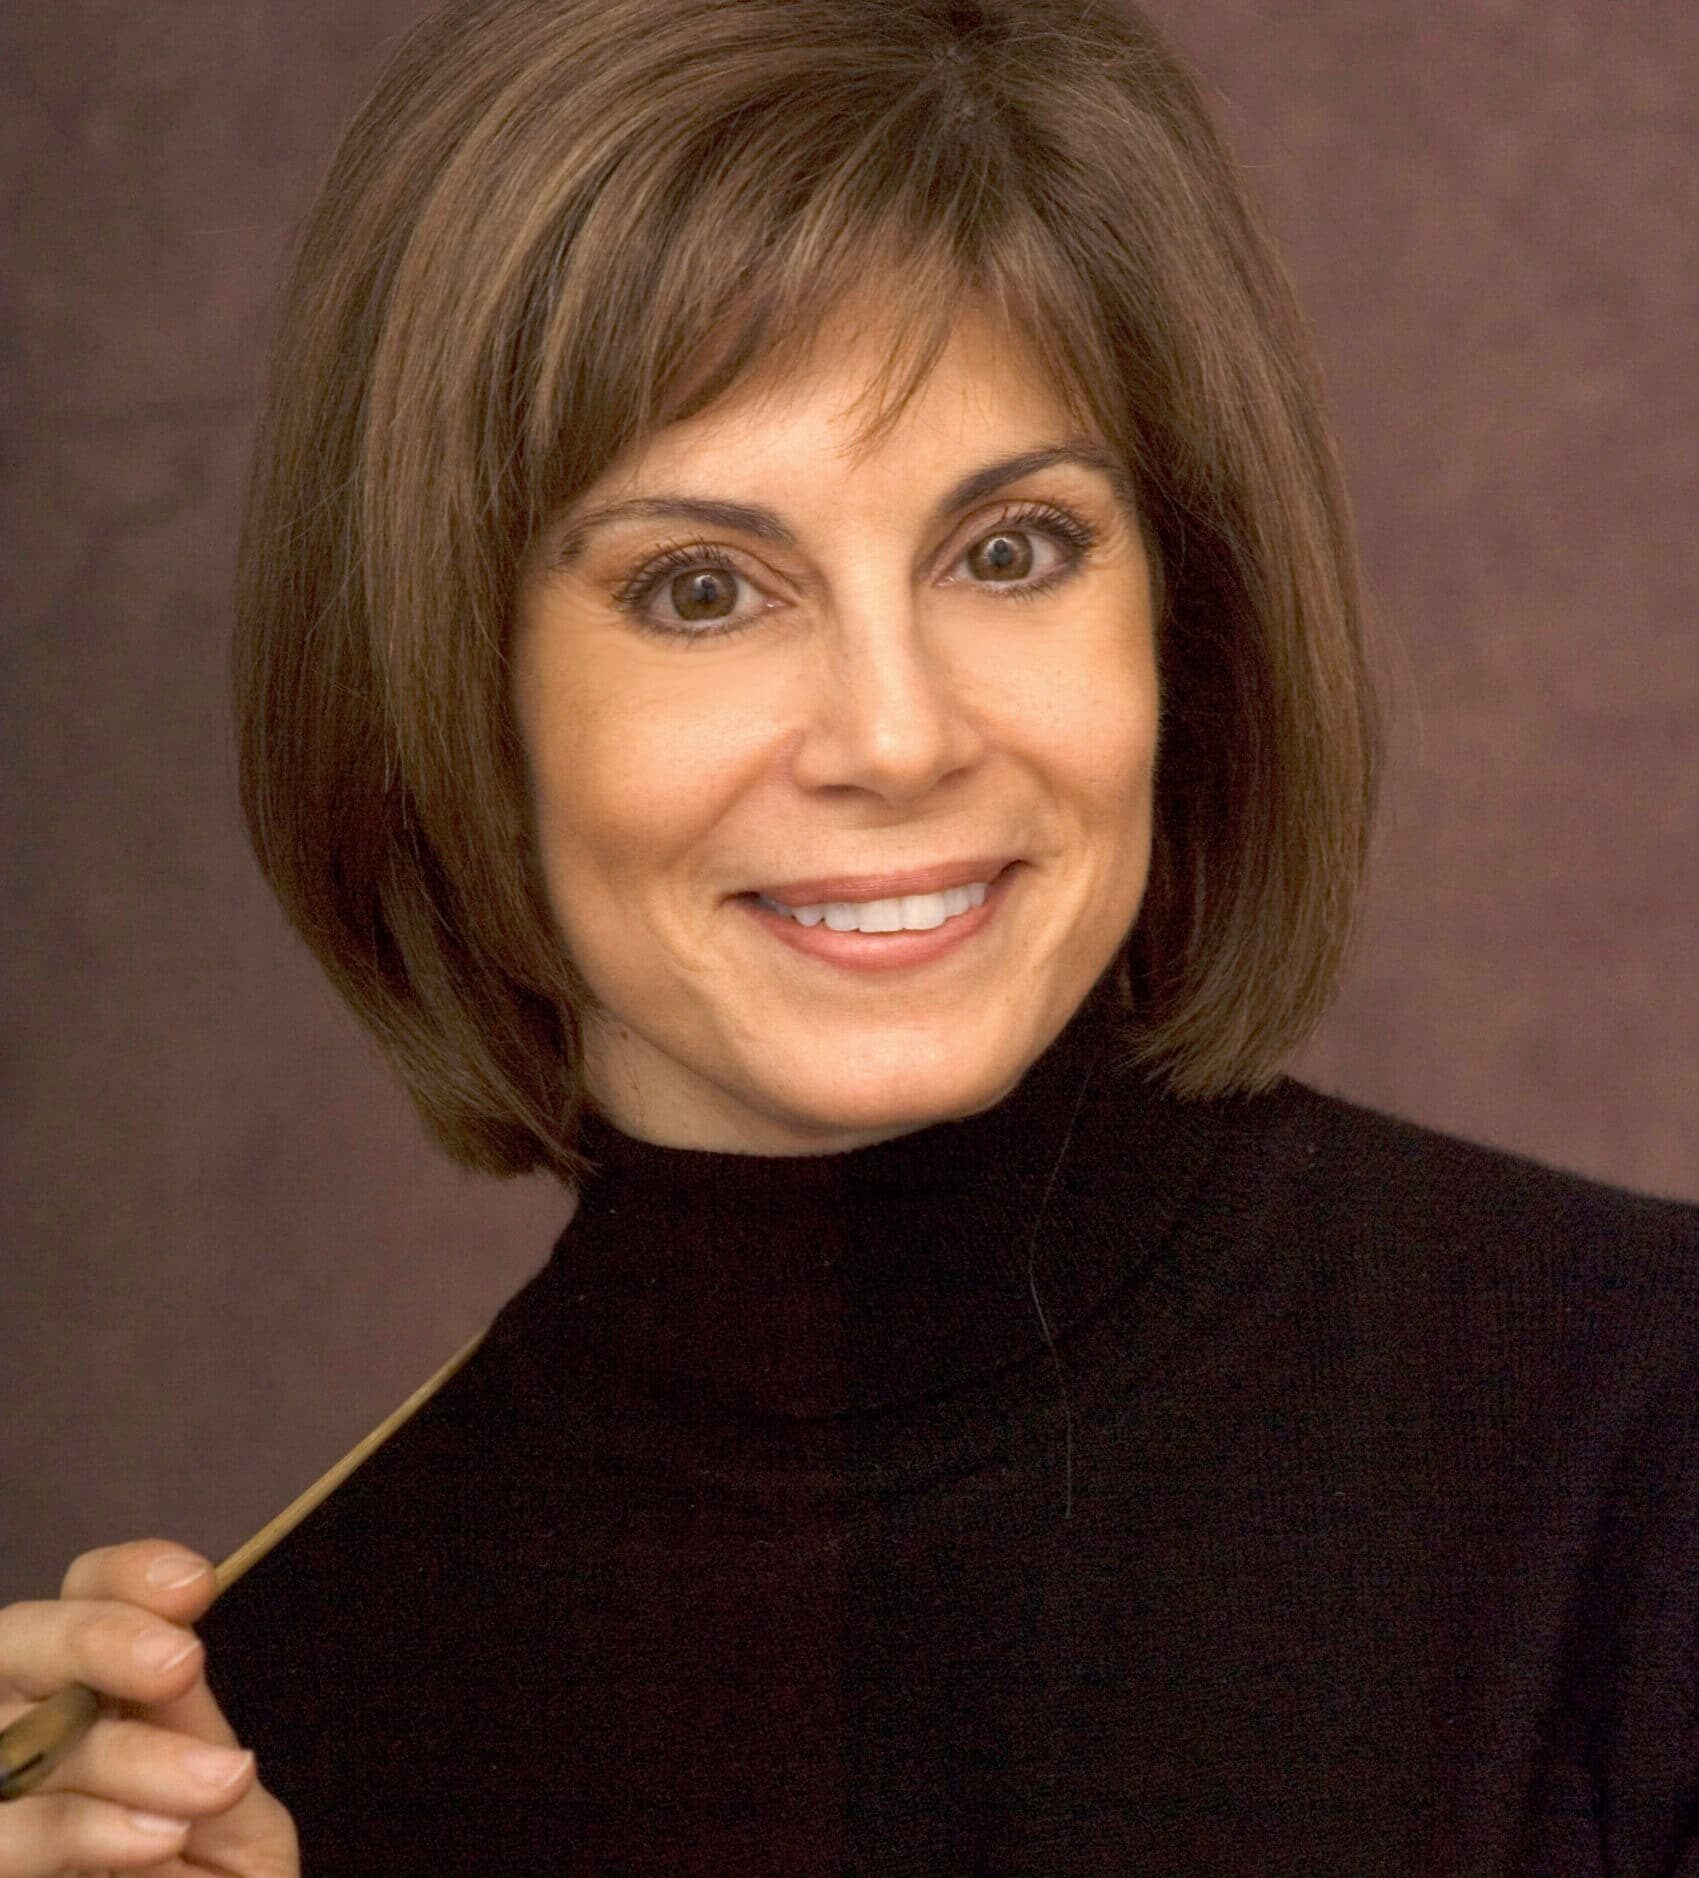 JoAnn Falletta holding a conductor's baton and smiling at camera